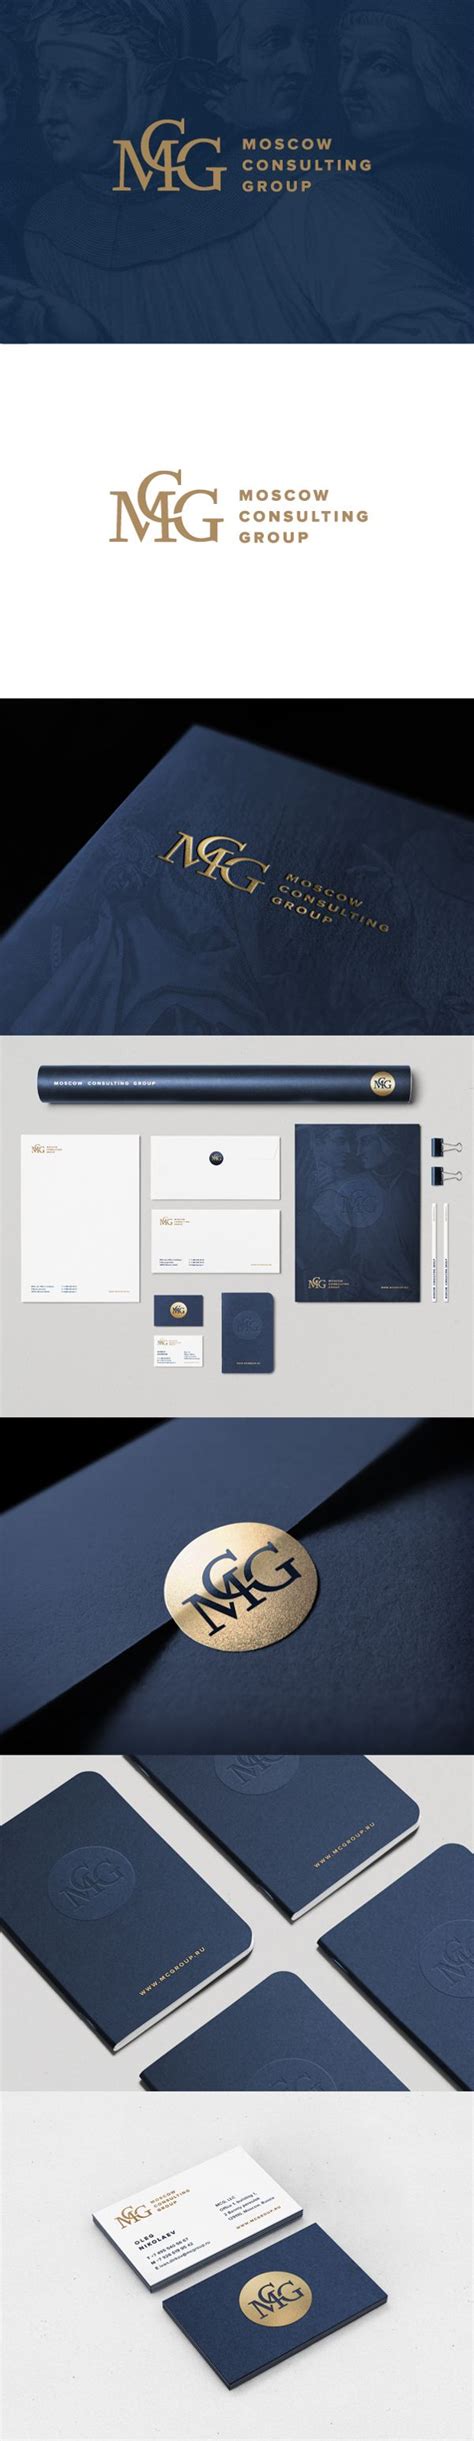 Moscow Consulting Group Identity And Web Design On Behance Identity